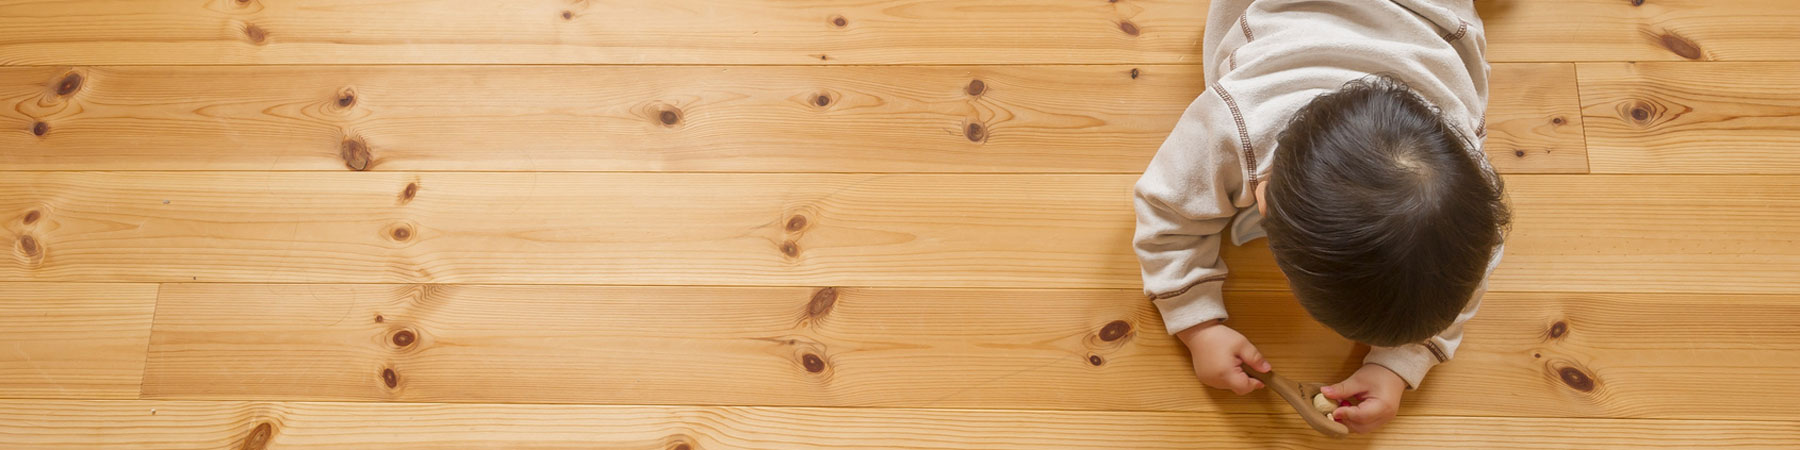 Kid Playing With Toy On Hardwood Flooring